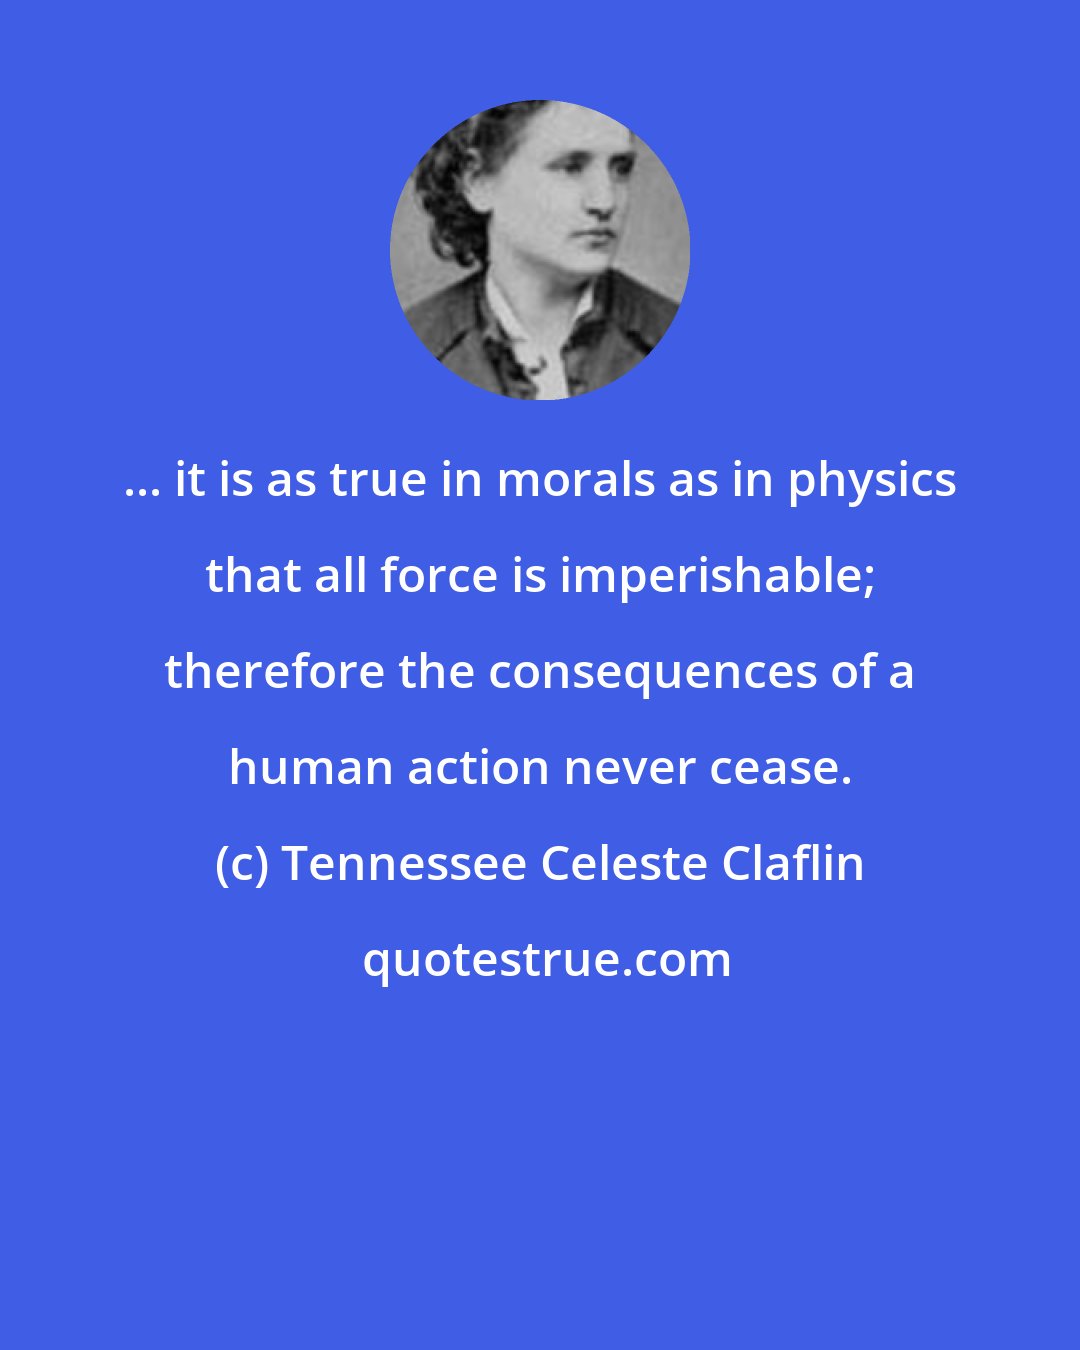 Tennessee Celeste Claflin: ... it is as true in morals as in physics that all force is imperishable; therefore the consequences of a human action never cease.